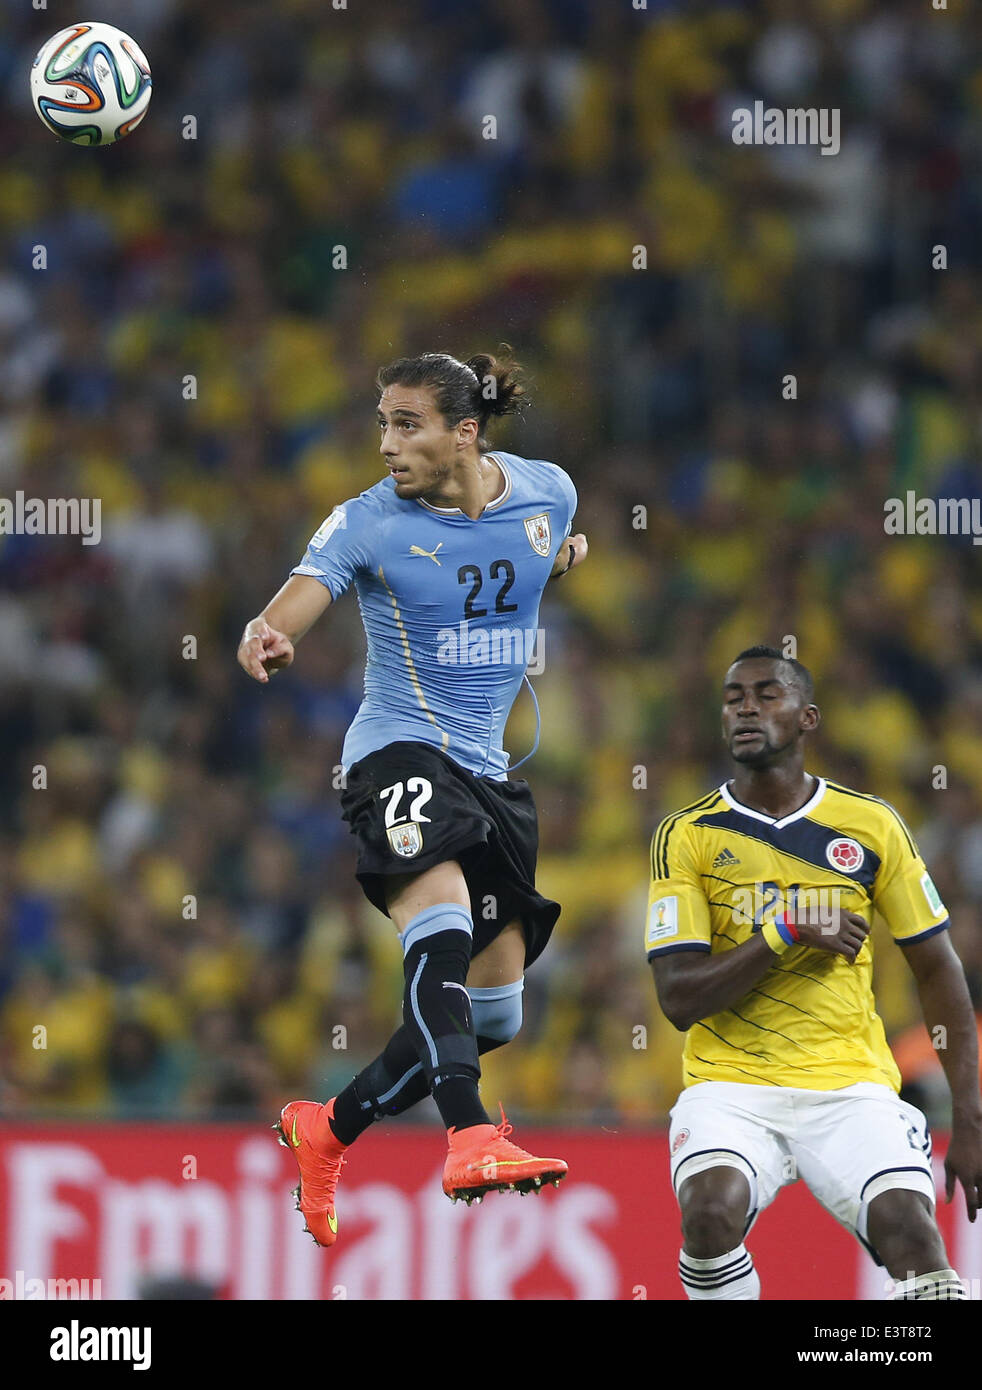 Rio De Janeiro, Brazil. 28th June, 2014. Uruguay's Martin Caceres (L) heads the ball during a Round of 16 match between Colombia and Uruguay of 2014 FIFA World Cup at the Estadio do Maracana Stadium in Rio de Janeiro, Brazil, on June 28, 2014. Credit:  Wang Lili/Xinhua/Alamy Live News Stock Photo